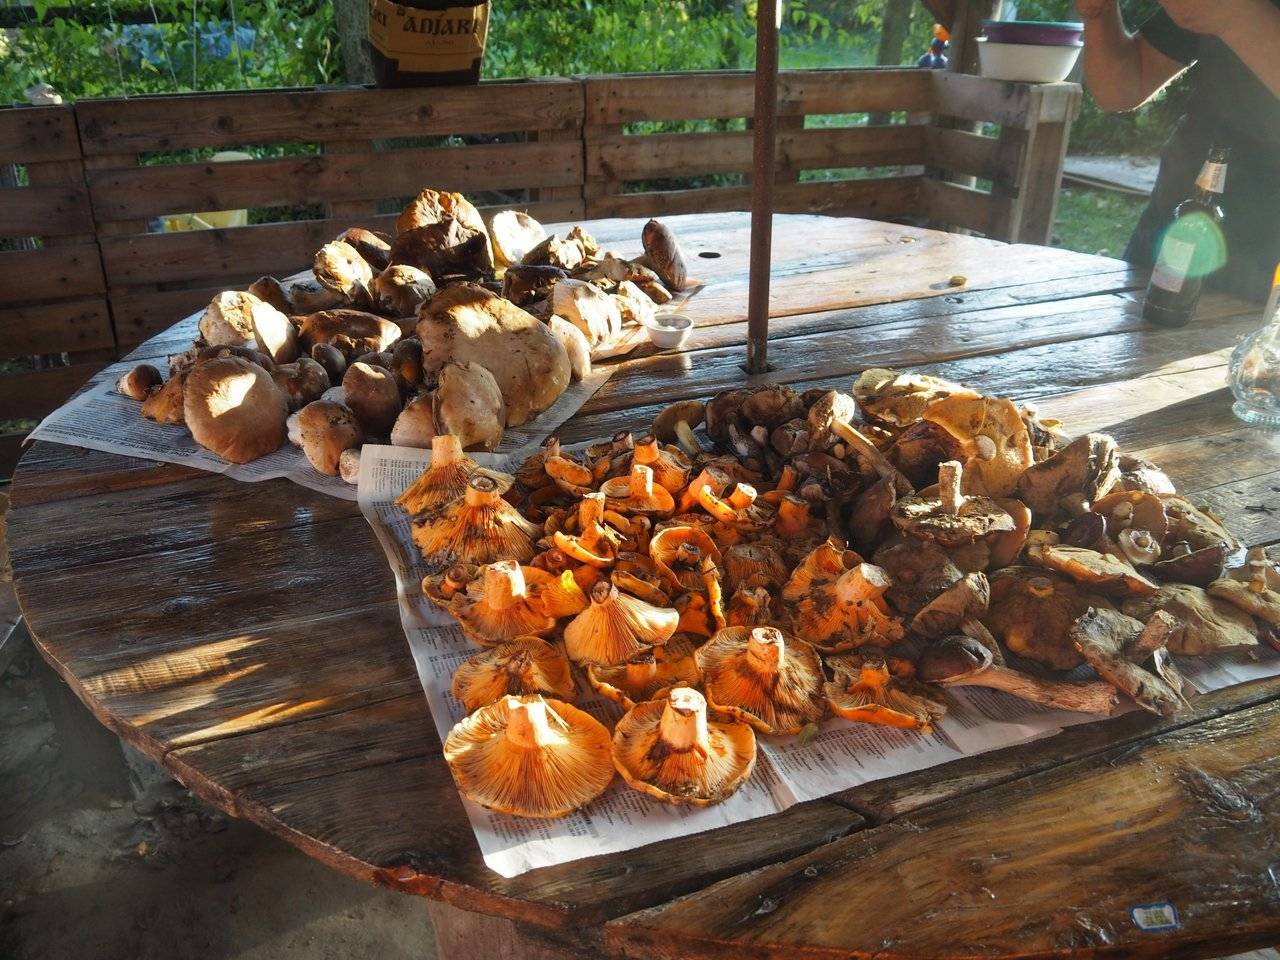 All our mushrooms on the table